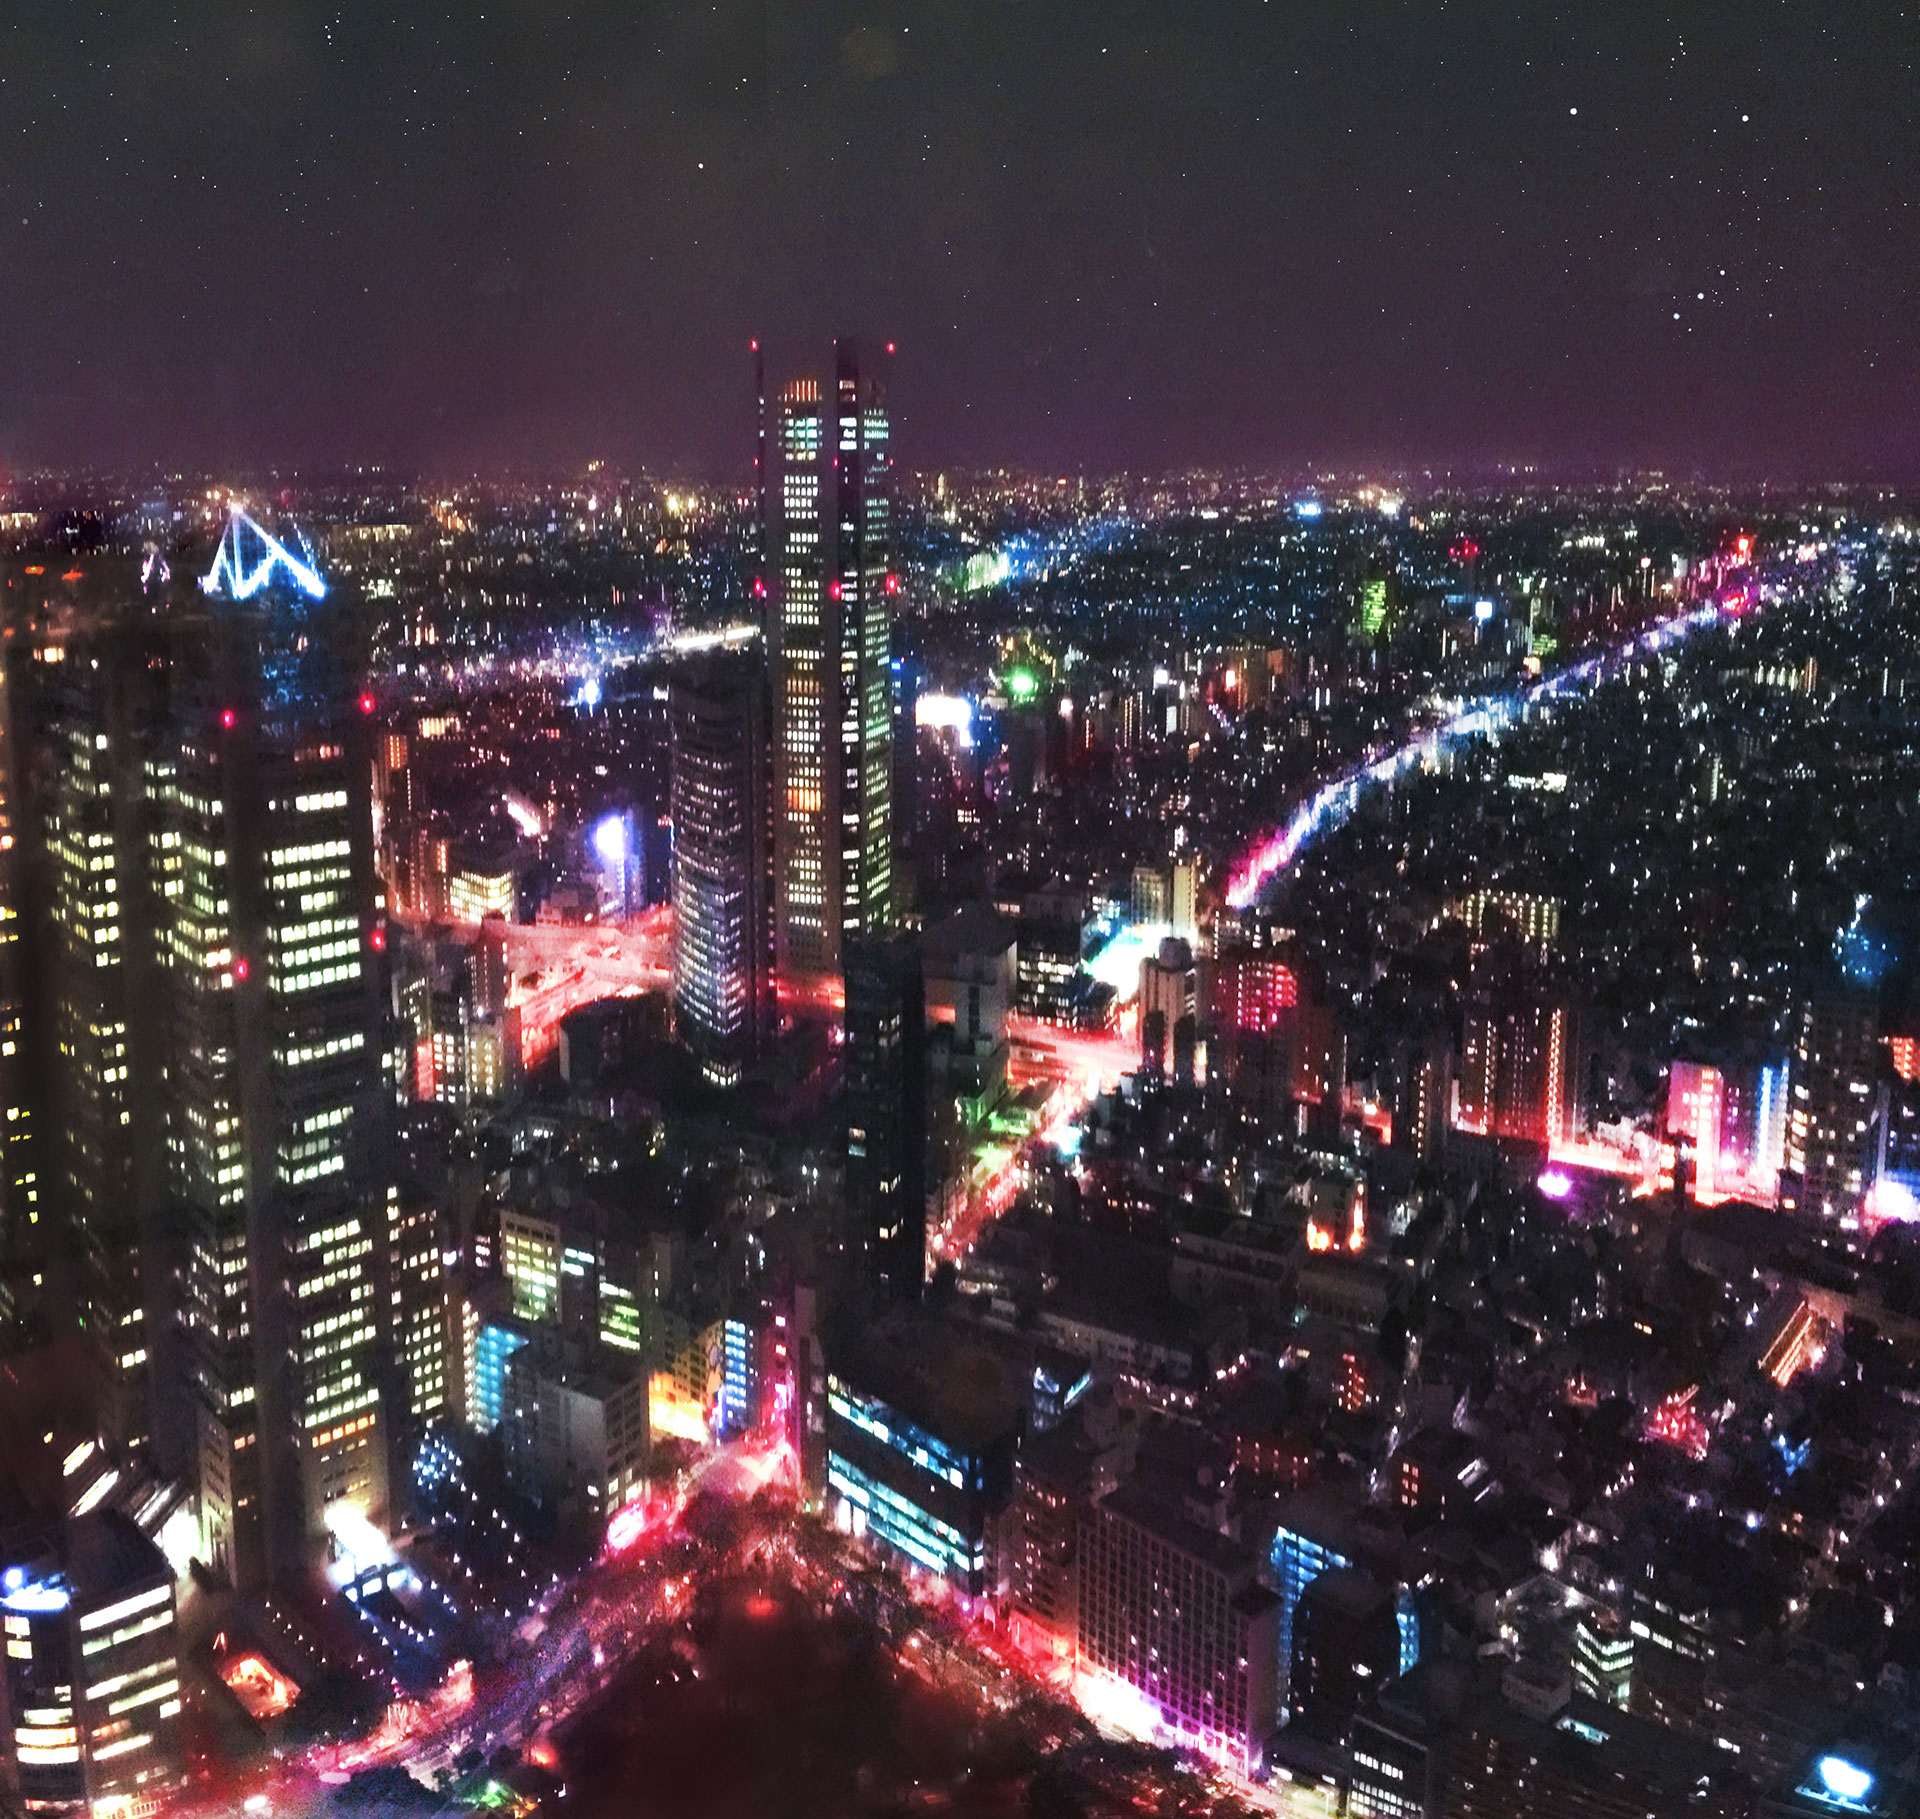 View of Shinjuku, Tokyo City, from the Tokyo Metropolitan Government Observatory by night, (Nos Dren)